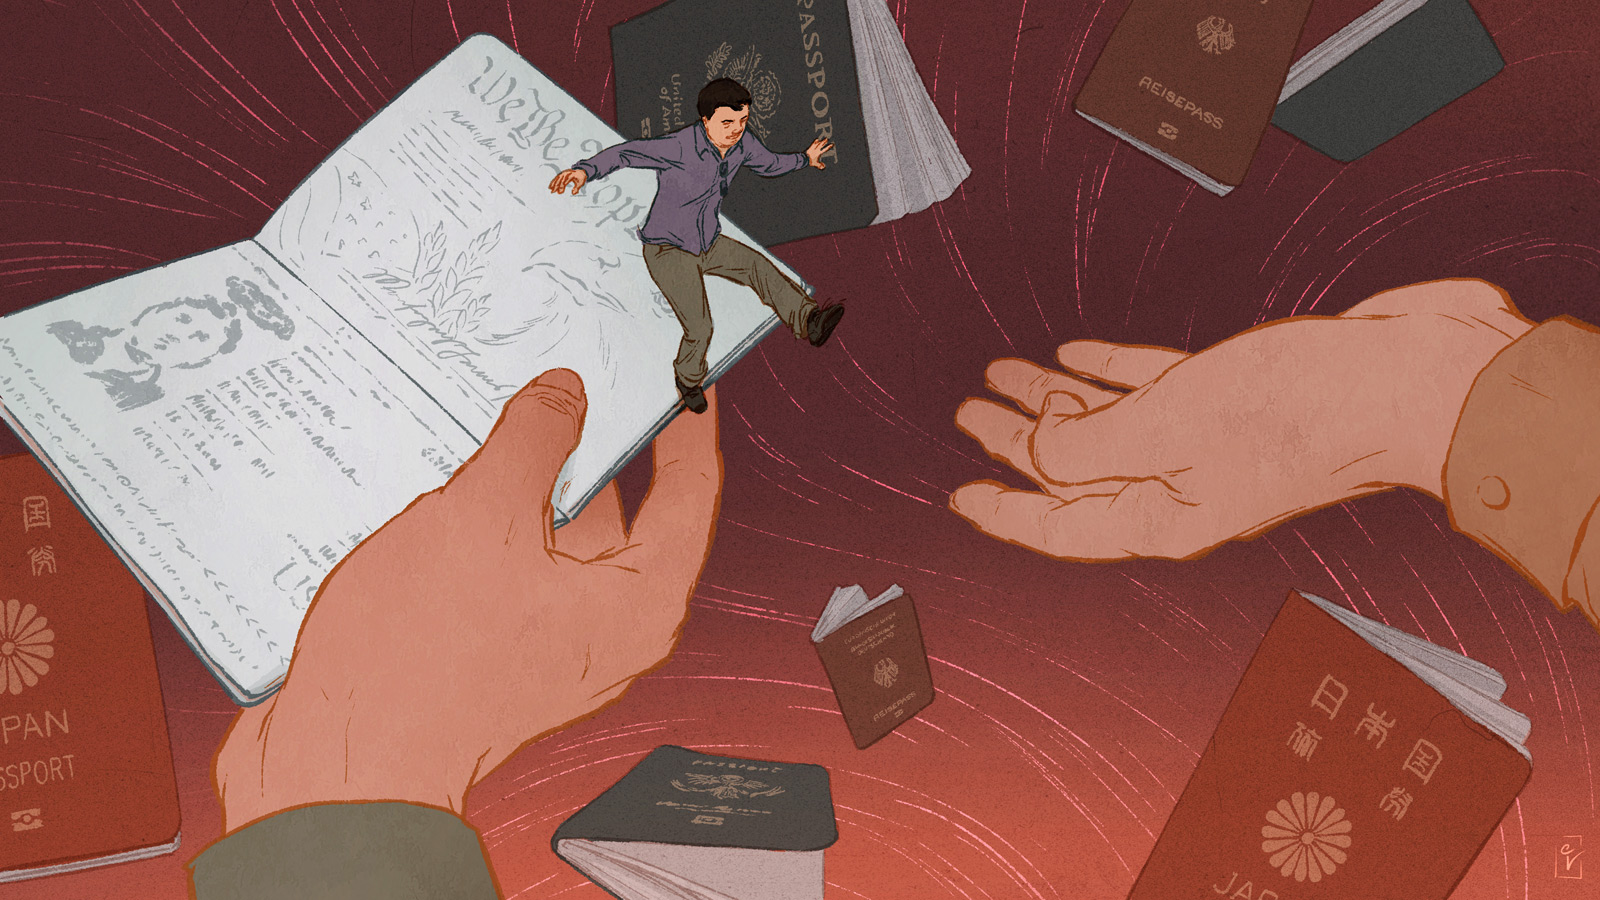 A header image showing one hand handing a passport over to another hand. A man is balancing on the passport, leaning away from the approaching hand. Other passports can be seen in the background.